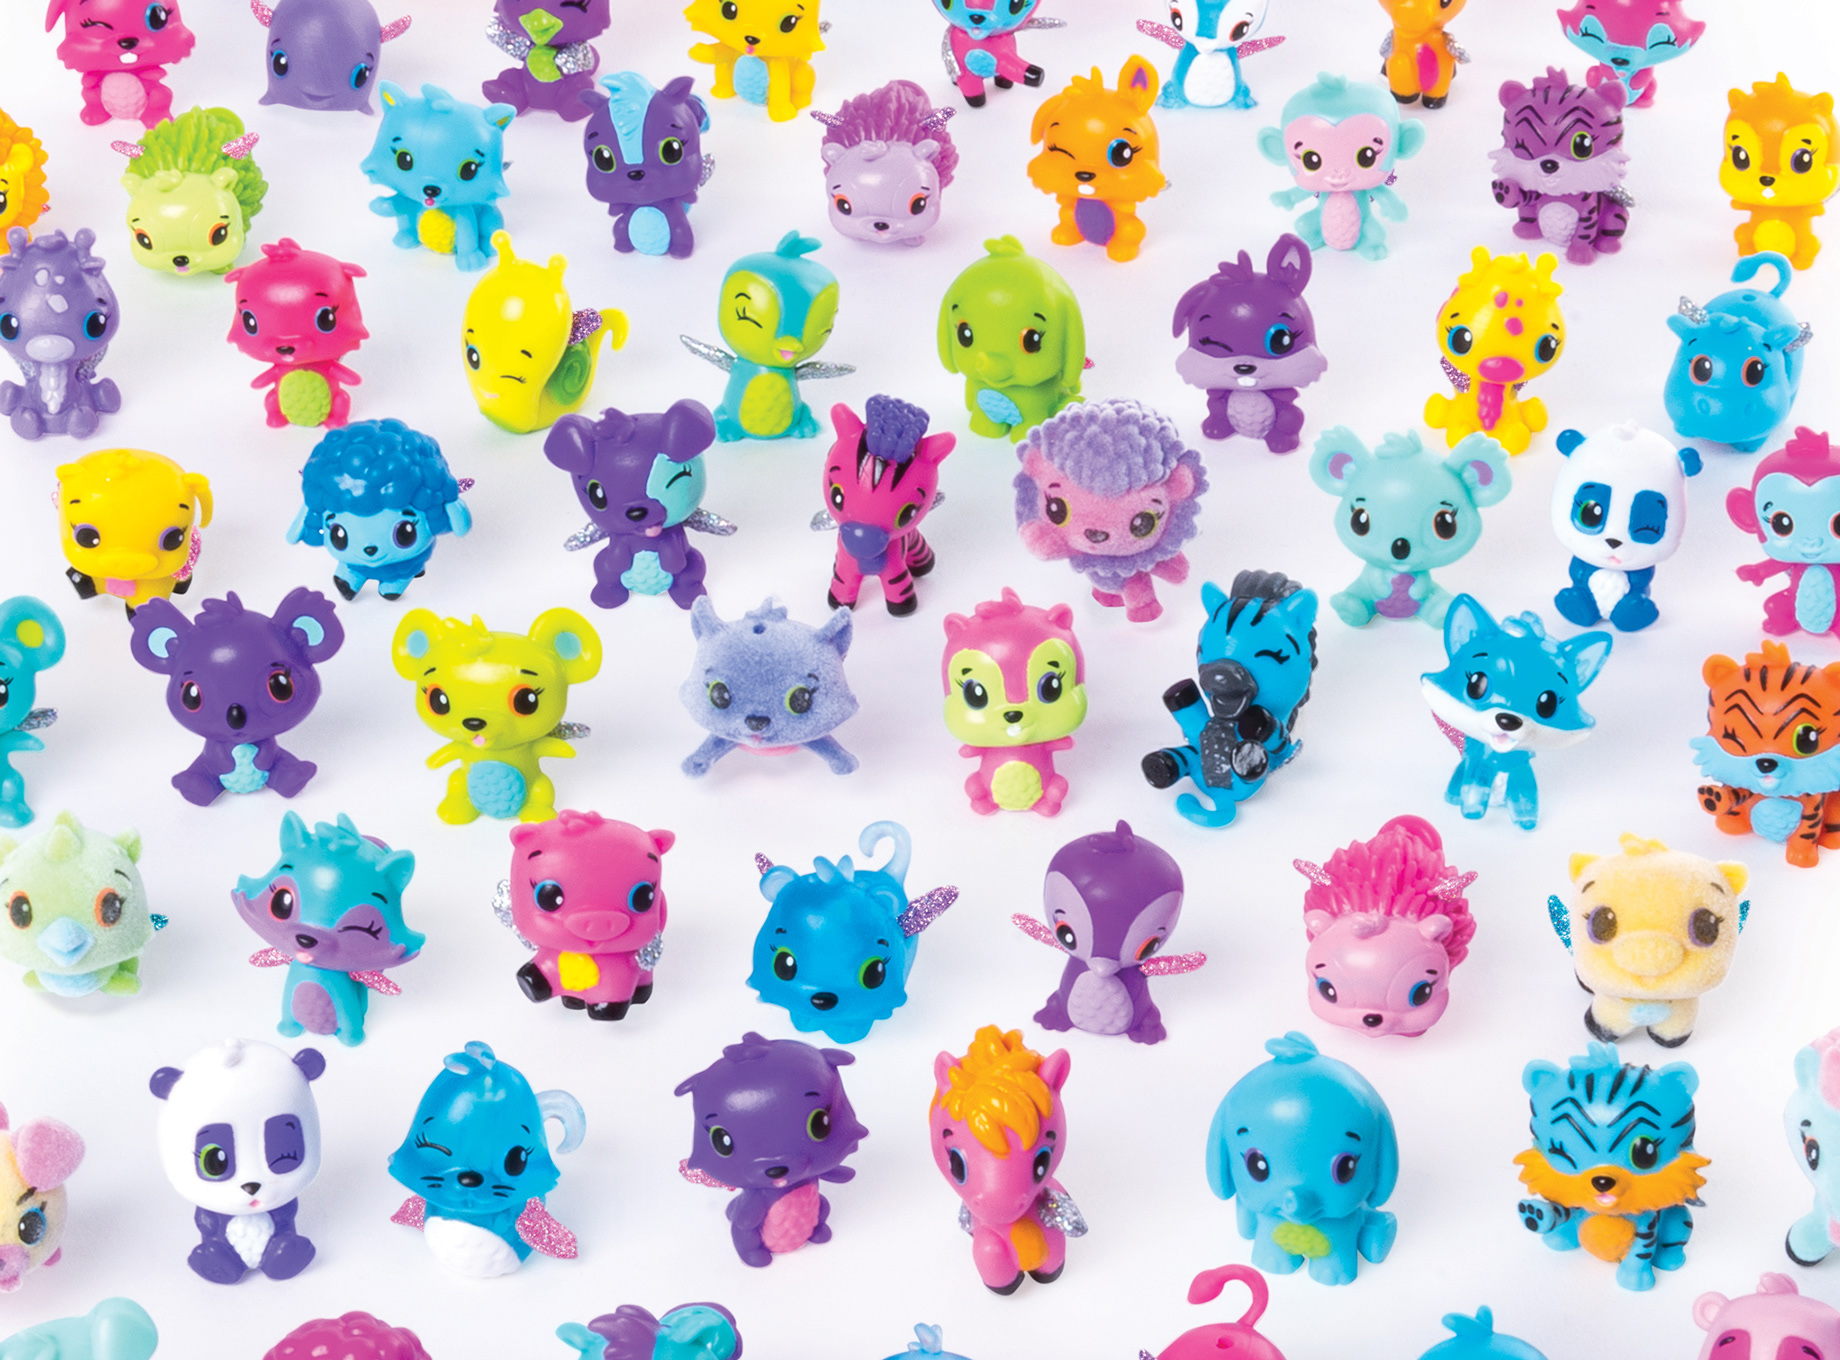 Hatch A Whole World With New Hatchimals Colleggtibles